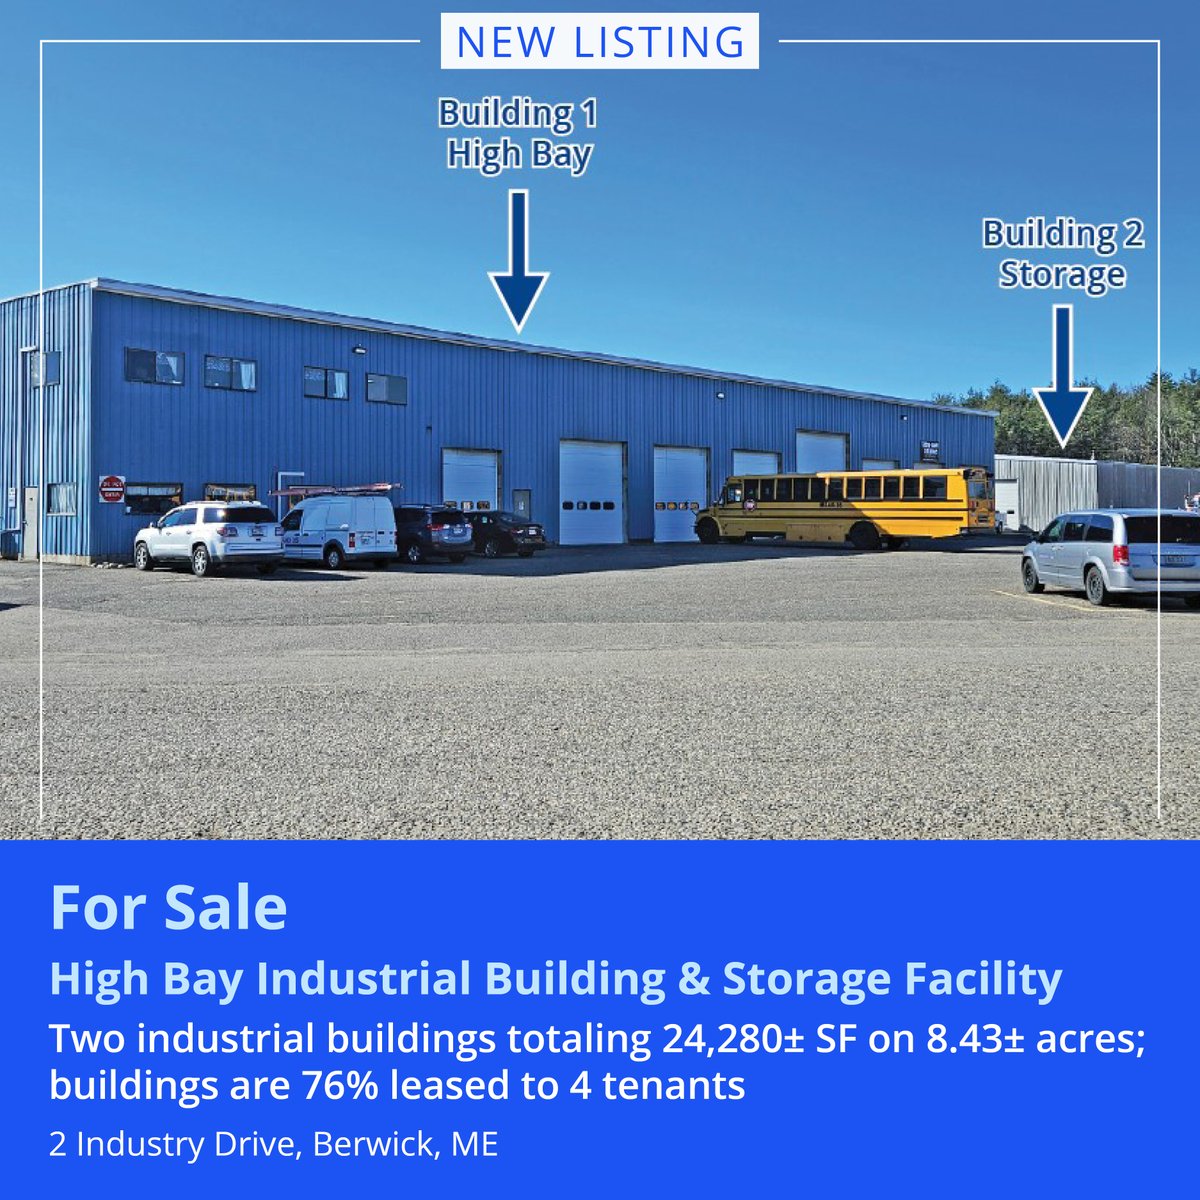 NEW LISTING! Two industrial buildings totaling 24,280± SF on 8.43 acres on Route 4/Portland Street available for sale in #BerwickME. Click here for more info: ow.ly/73k850RaxFv
#MarketLeader #Industrial #Investment #Sale